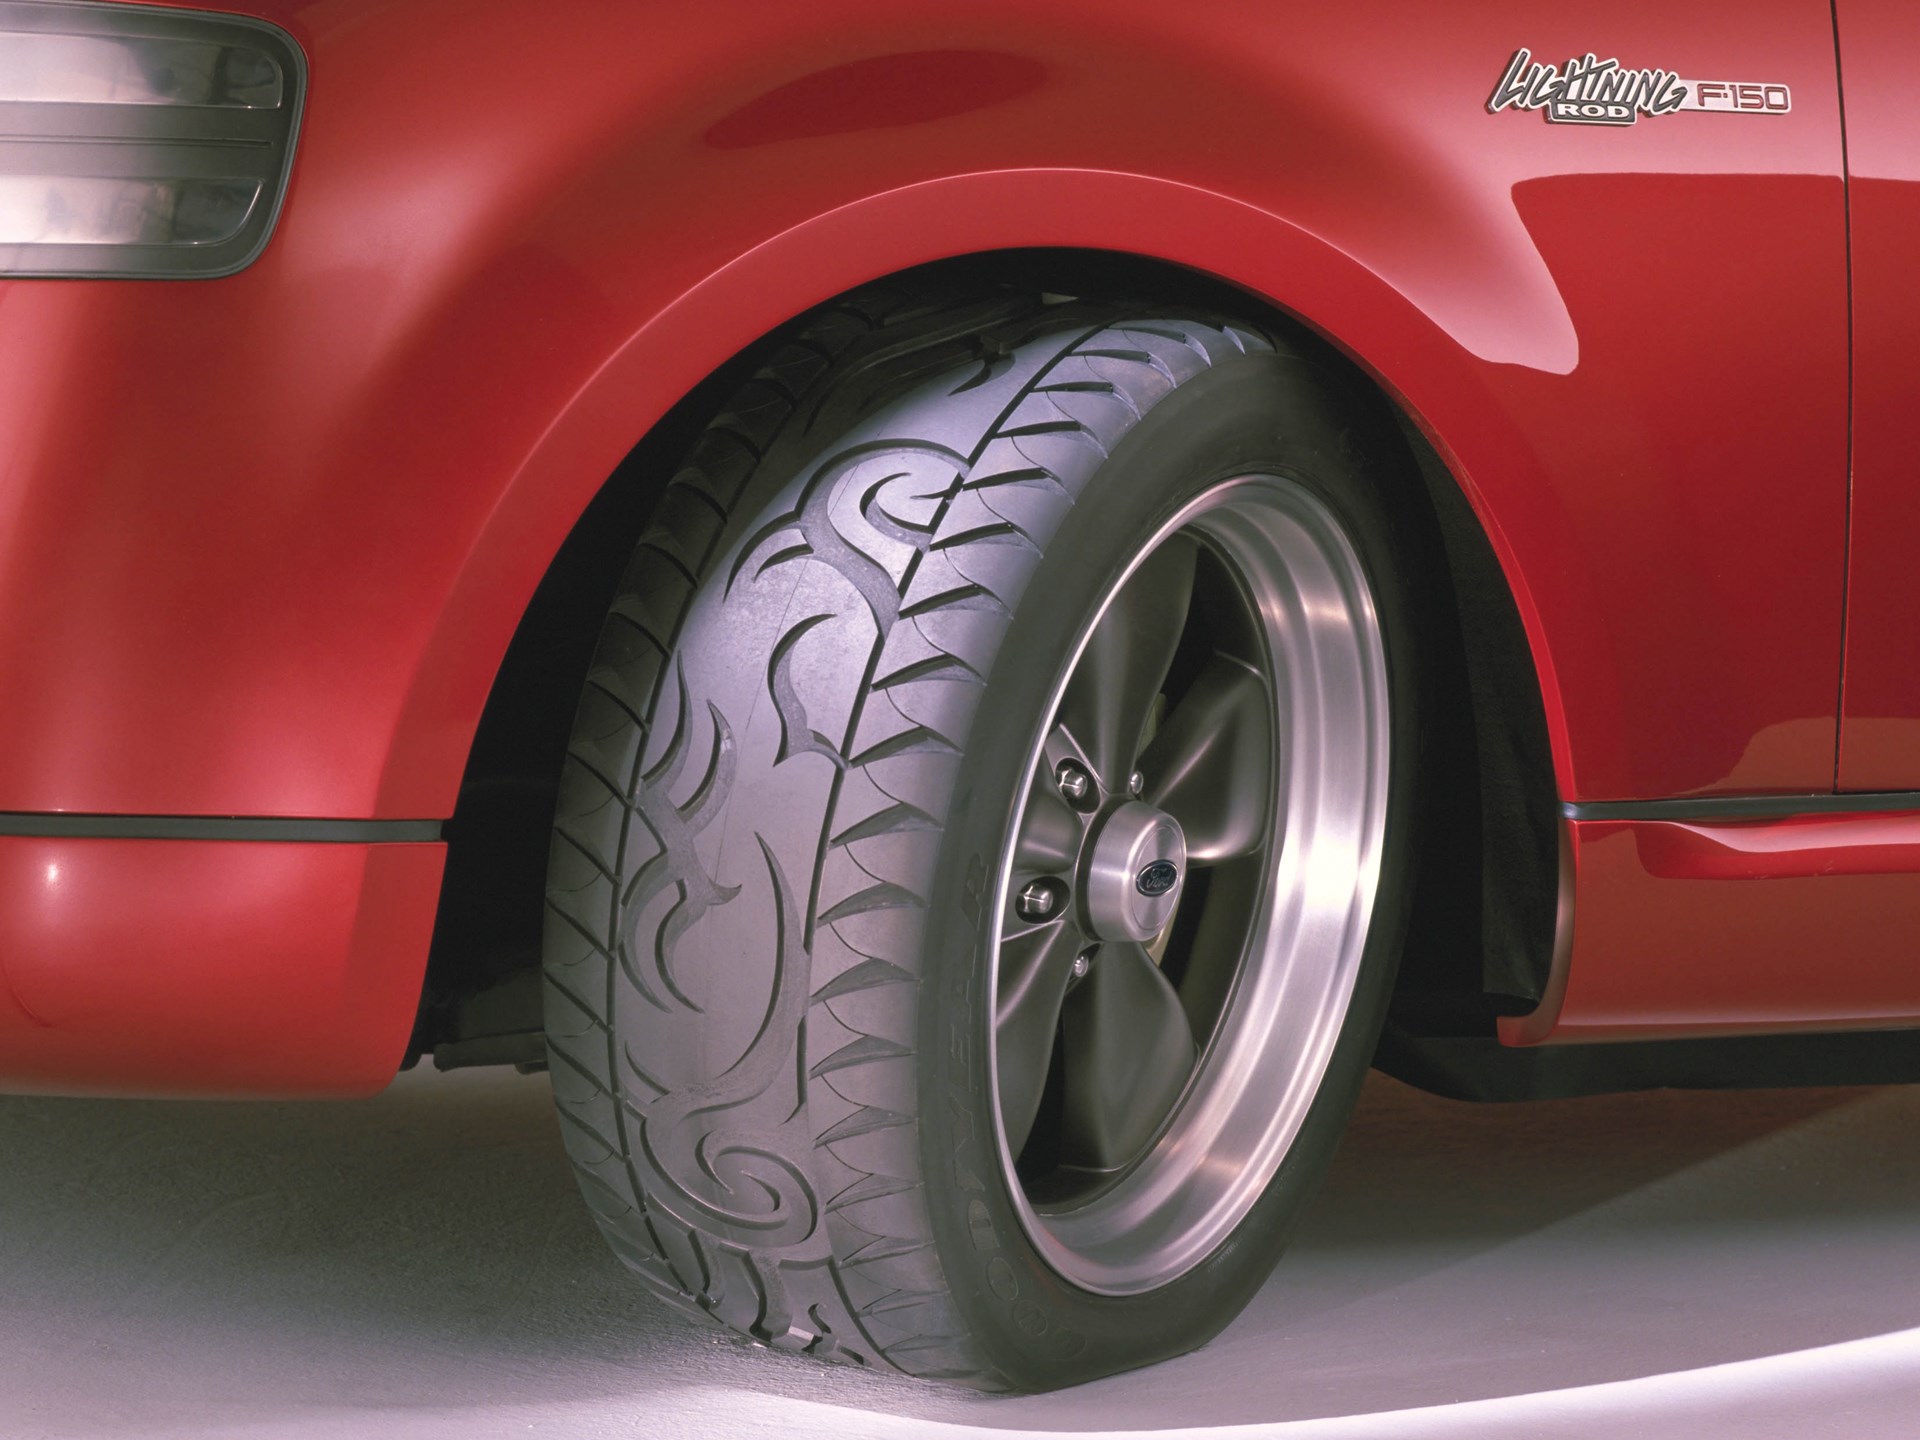 Ford F-150 Lightning Rod, 2001 - Twenty-inch, five-spoke cast aluminum wheels carry radial tires with tattoo pattern